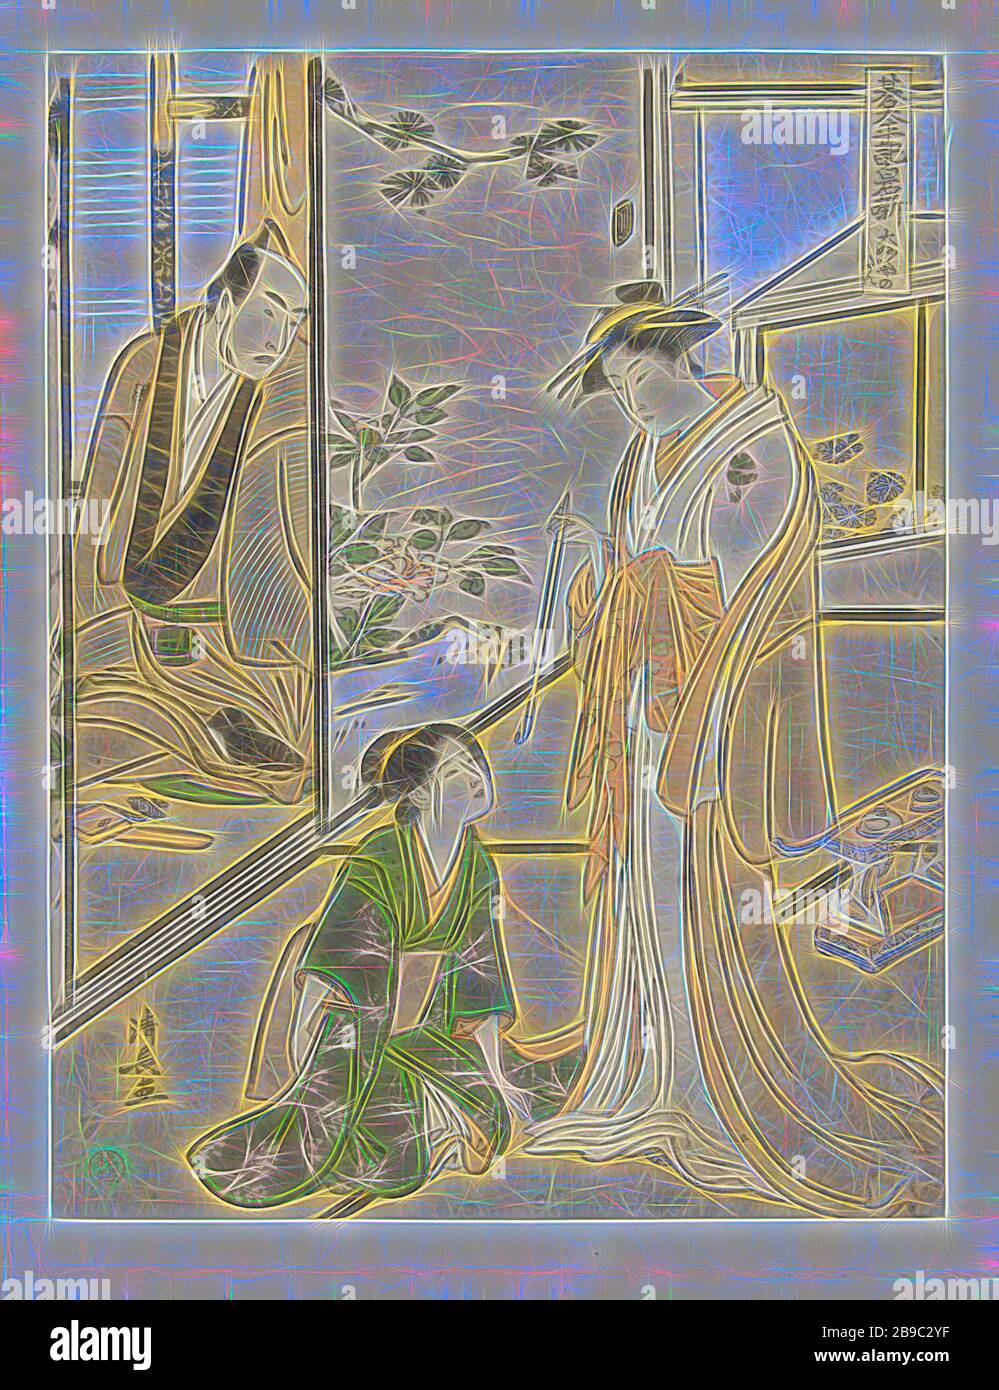 Scene in the Daifukuya house Daifukuya no dan (title on object) The play Shiraishibanashi (series title) Gotaiheiki Shiraishibanashi (series title on object), Courtisane Miyagino, standing with pipe in right hand, listening to her sister Shinobu, sitting in green kimono, telling about the death of their father, while the manager of the Daifukuya house, Soroku, whispers them from behind a sliding door, pipe, tobacco, Torii Kiyonaga (mentioned on object), Japan, 1783 - 1787, paper, colour woodcut, h 246 mm × w 188 mm, Reimagined by Gibon, design of warm cheerful glowing of brightness and light r Stock Photo